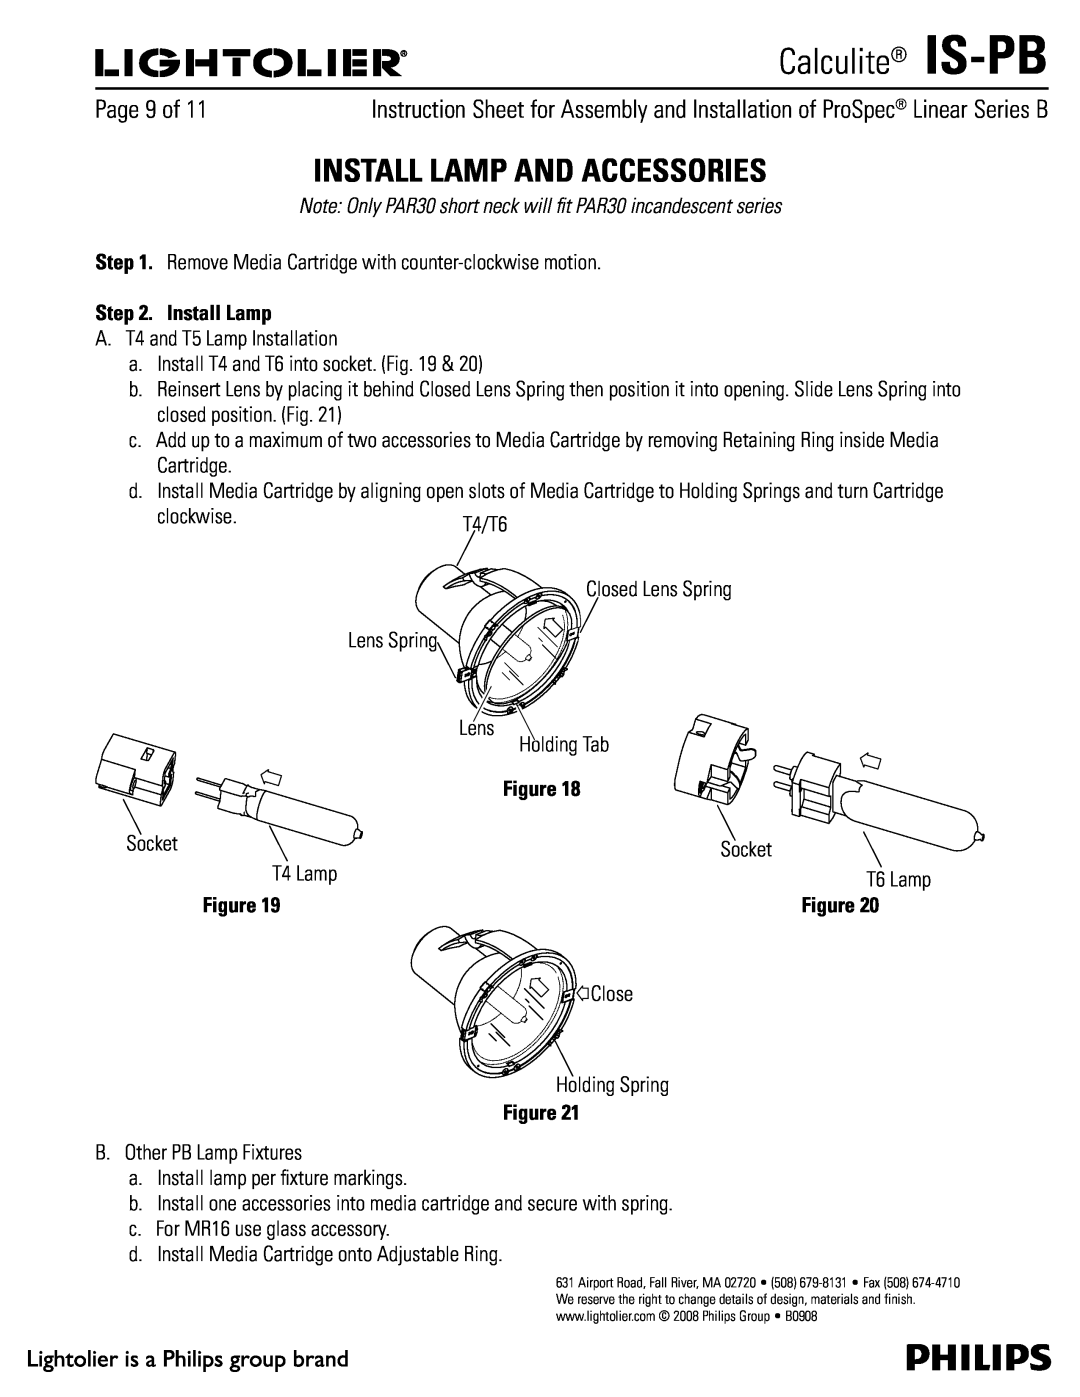 Lightolier PB manual Install Lamp And Accessories, $Bmdvmjuf Is-Pb 